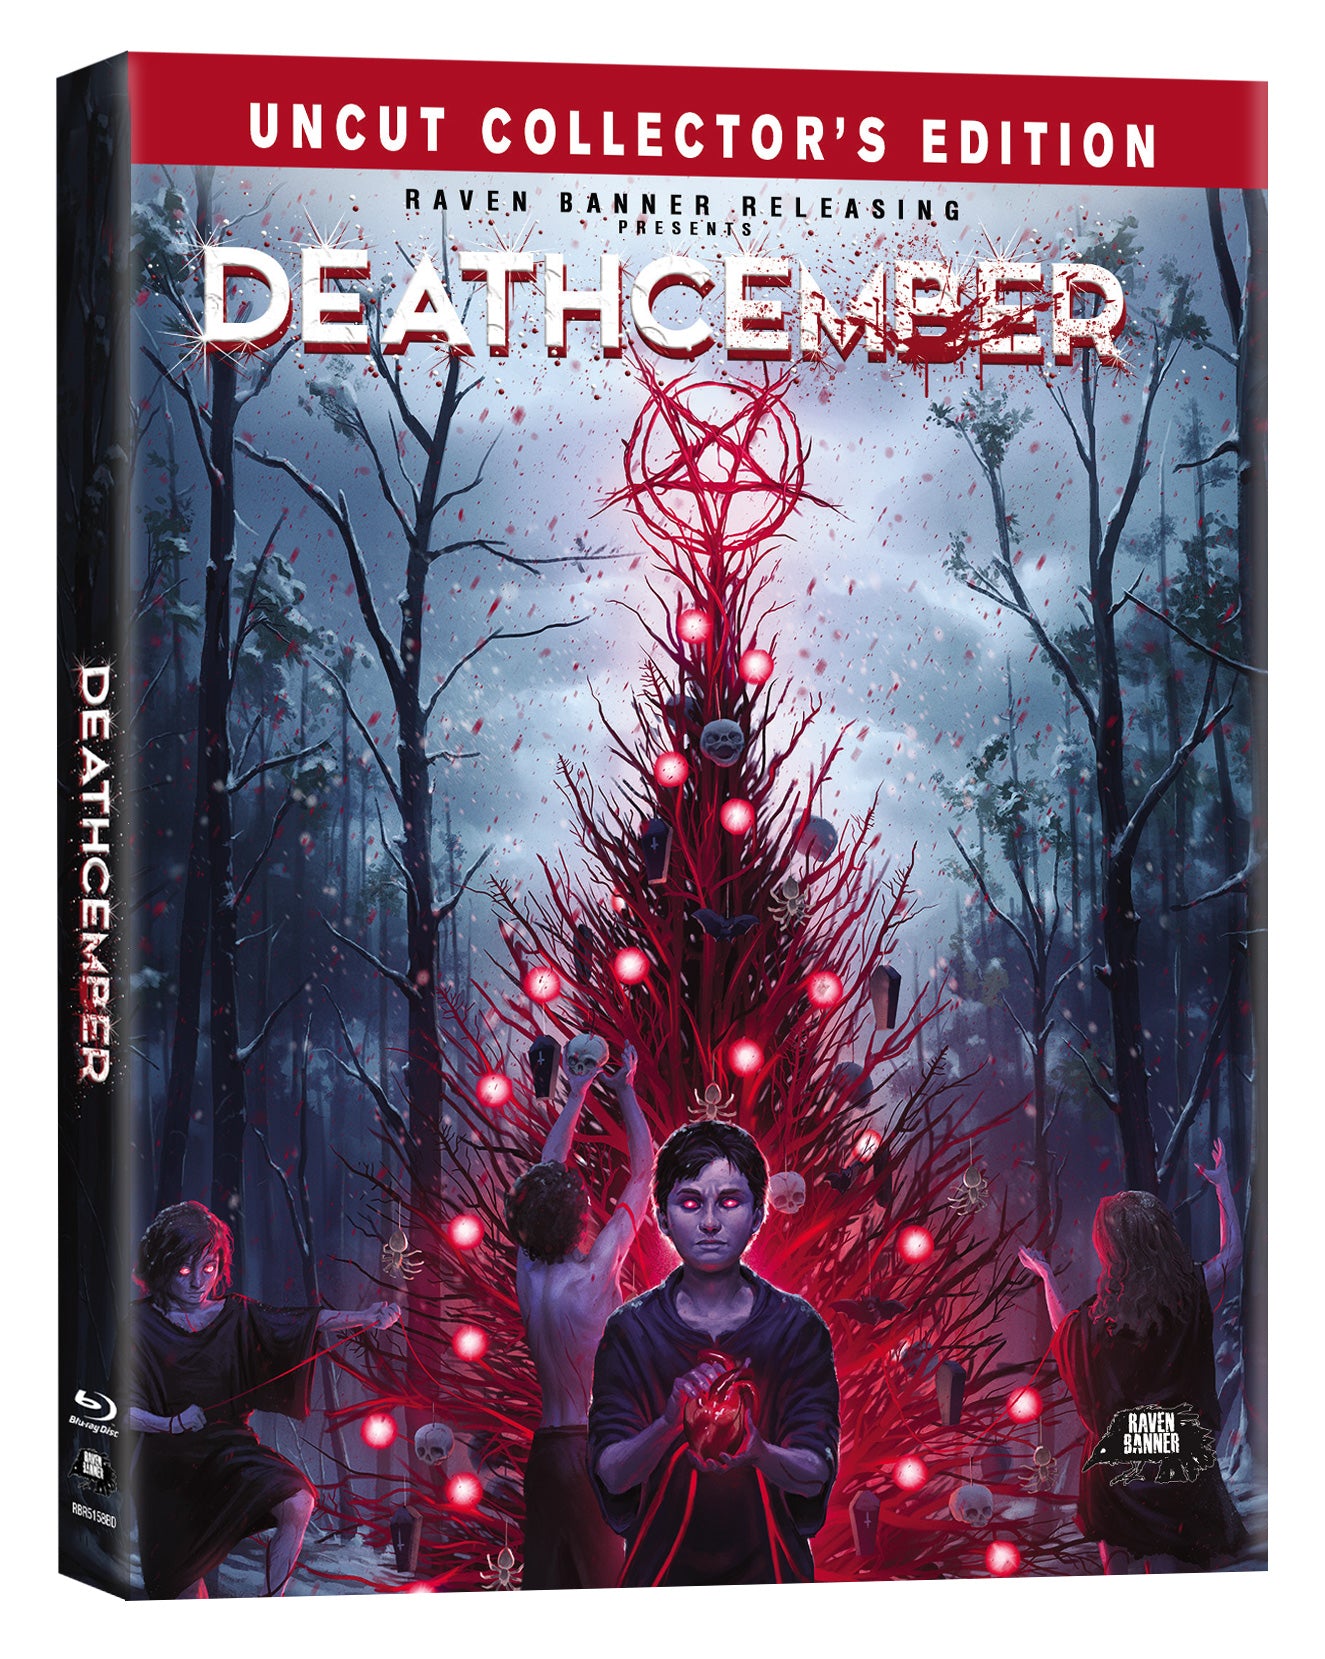 DEATHCEMBER - BLU-RAY/DVD COMBO